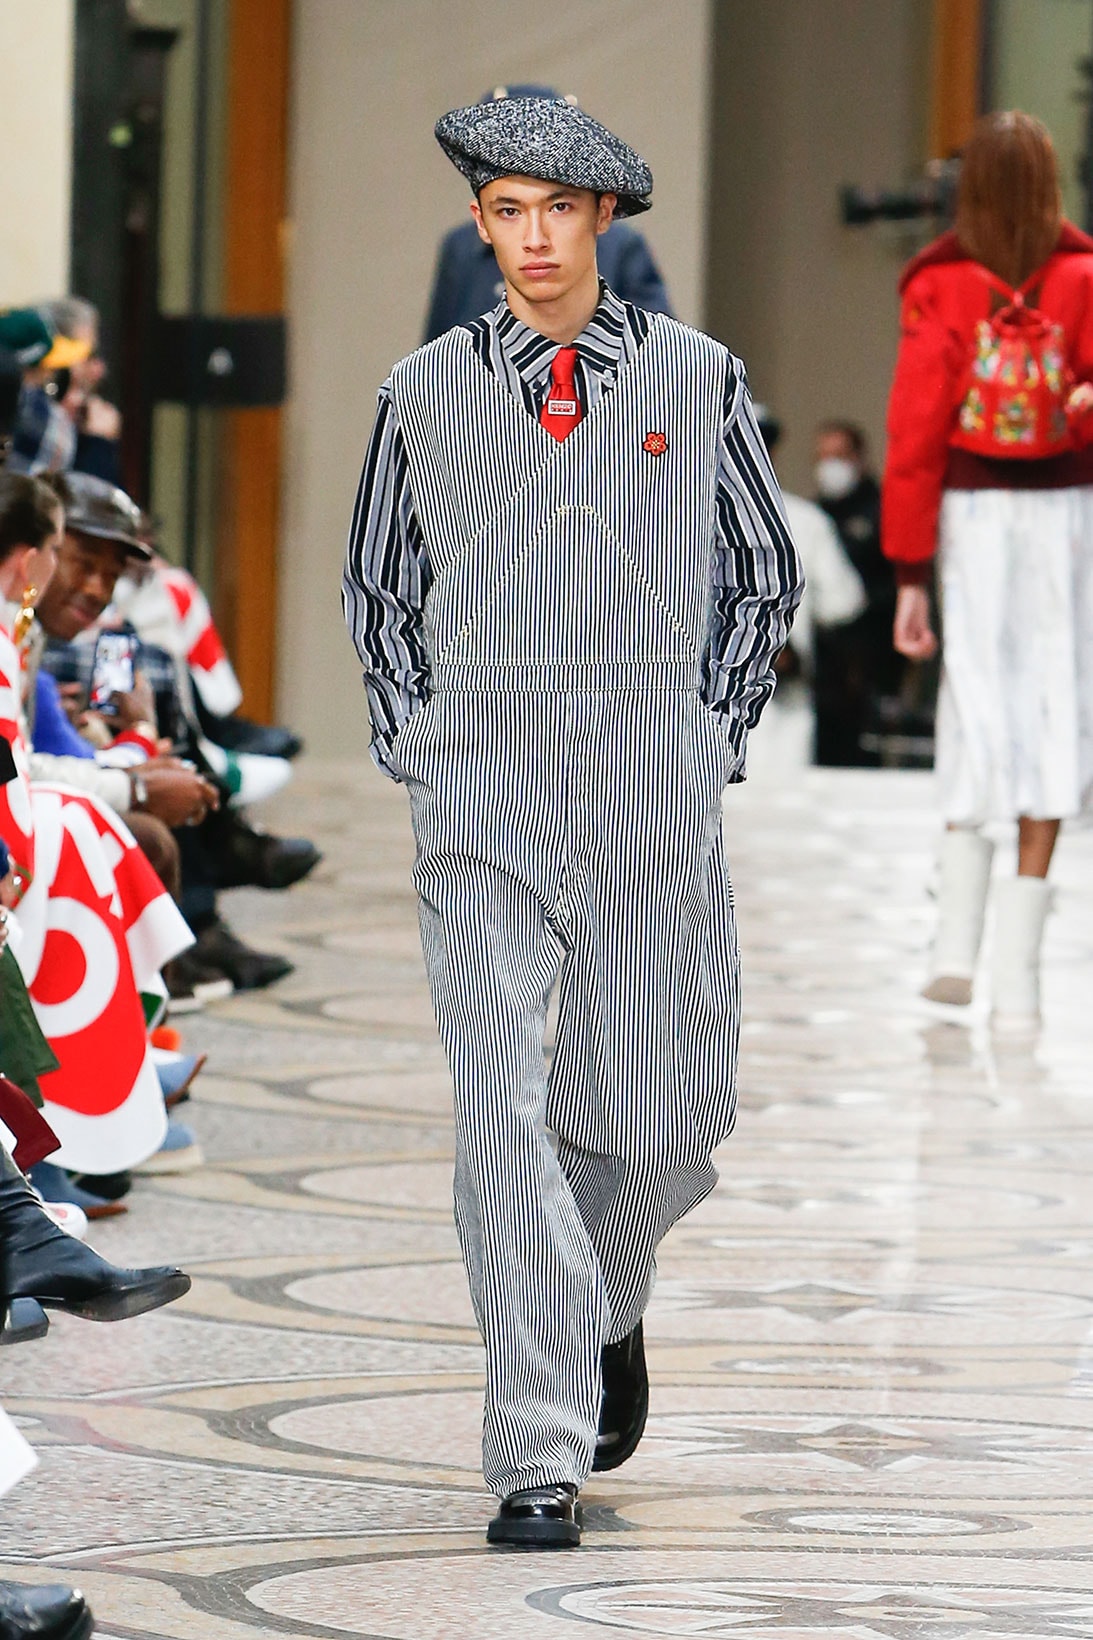 KENZO by NIGO's Fall/Winter 2022 Collection Debut: First Drop